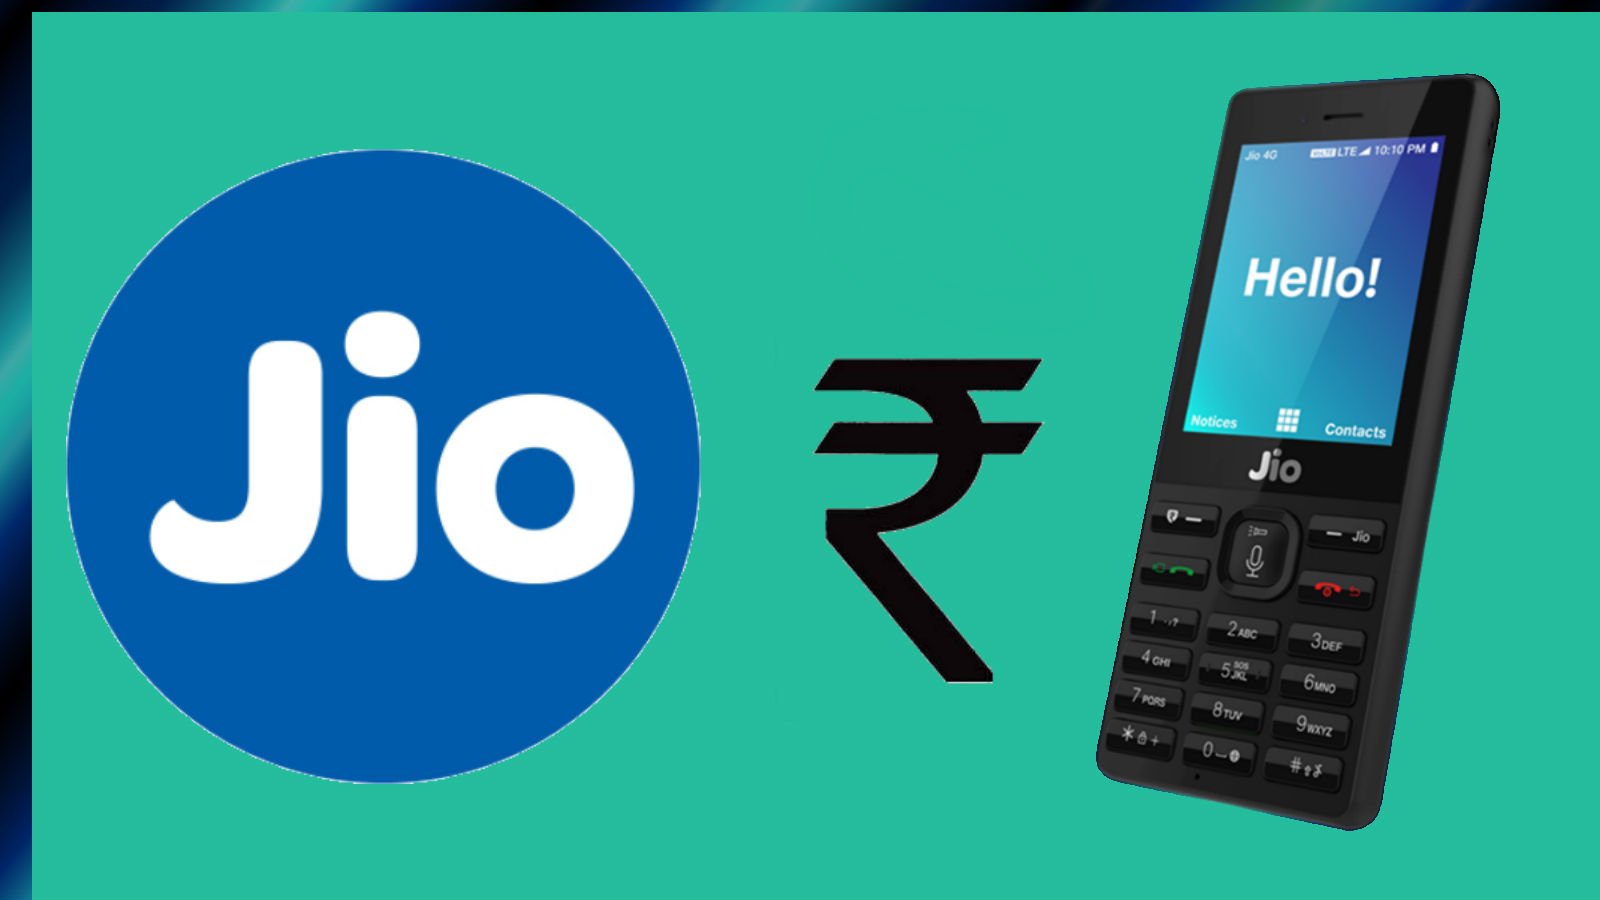 Download Marketplace.firefox.com For Jio Phone